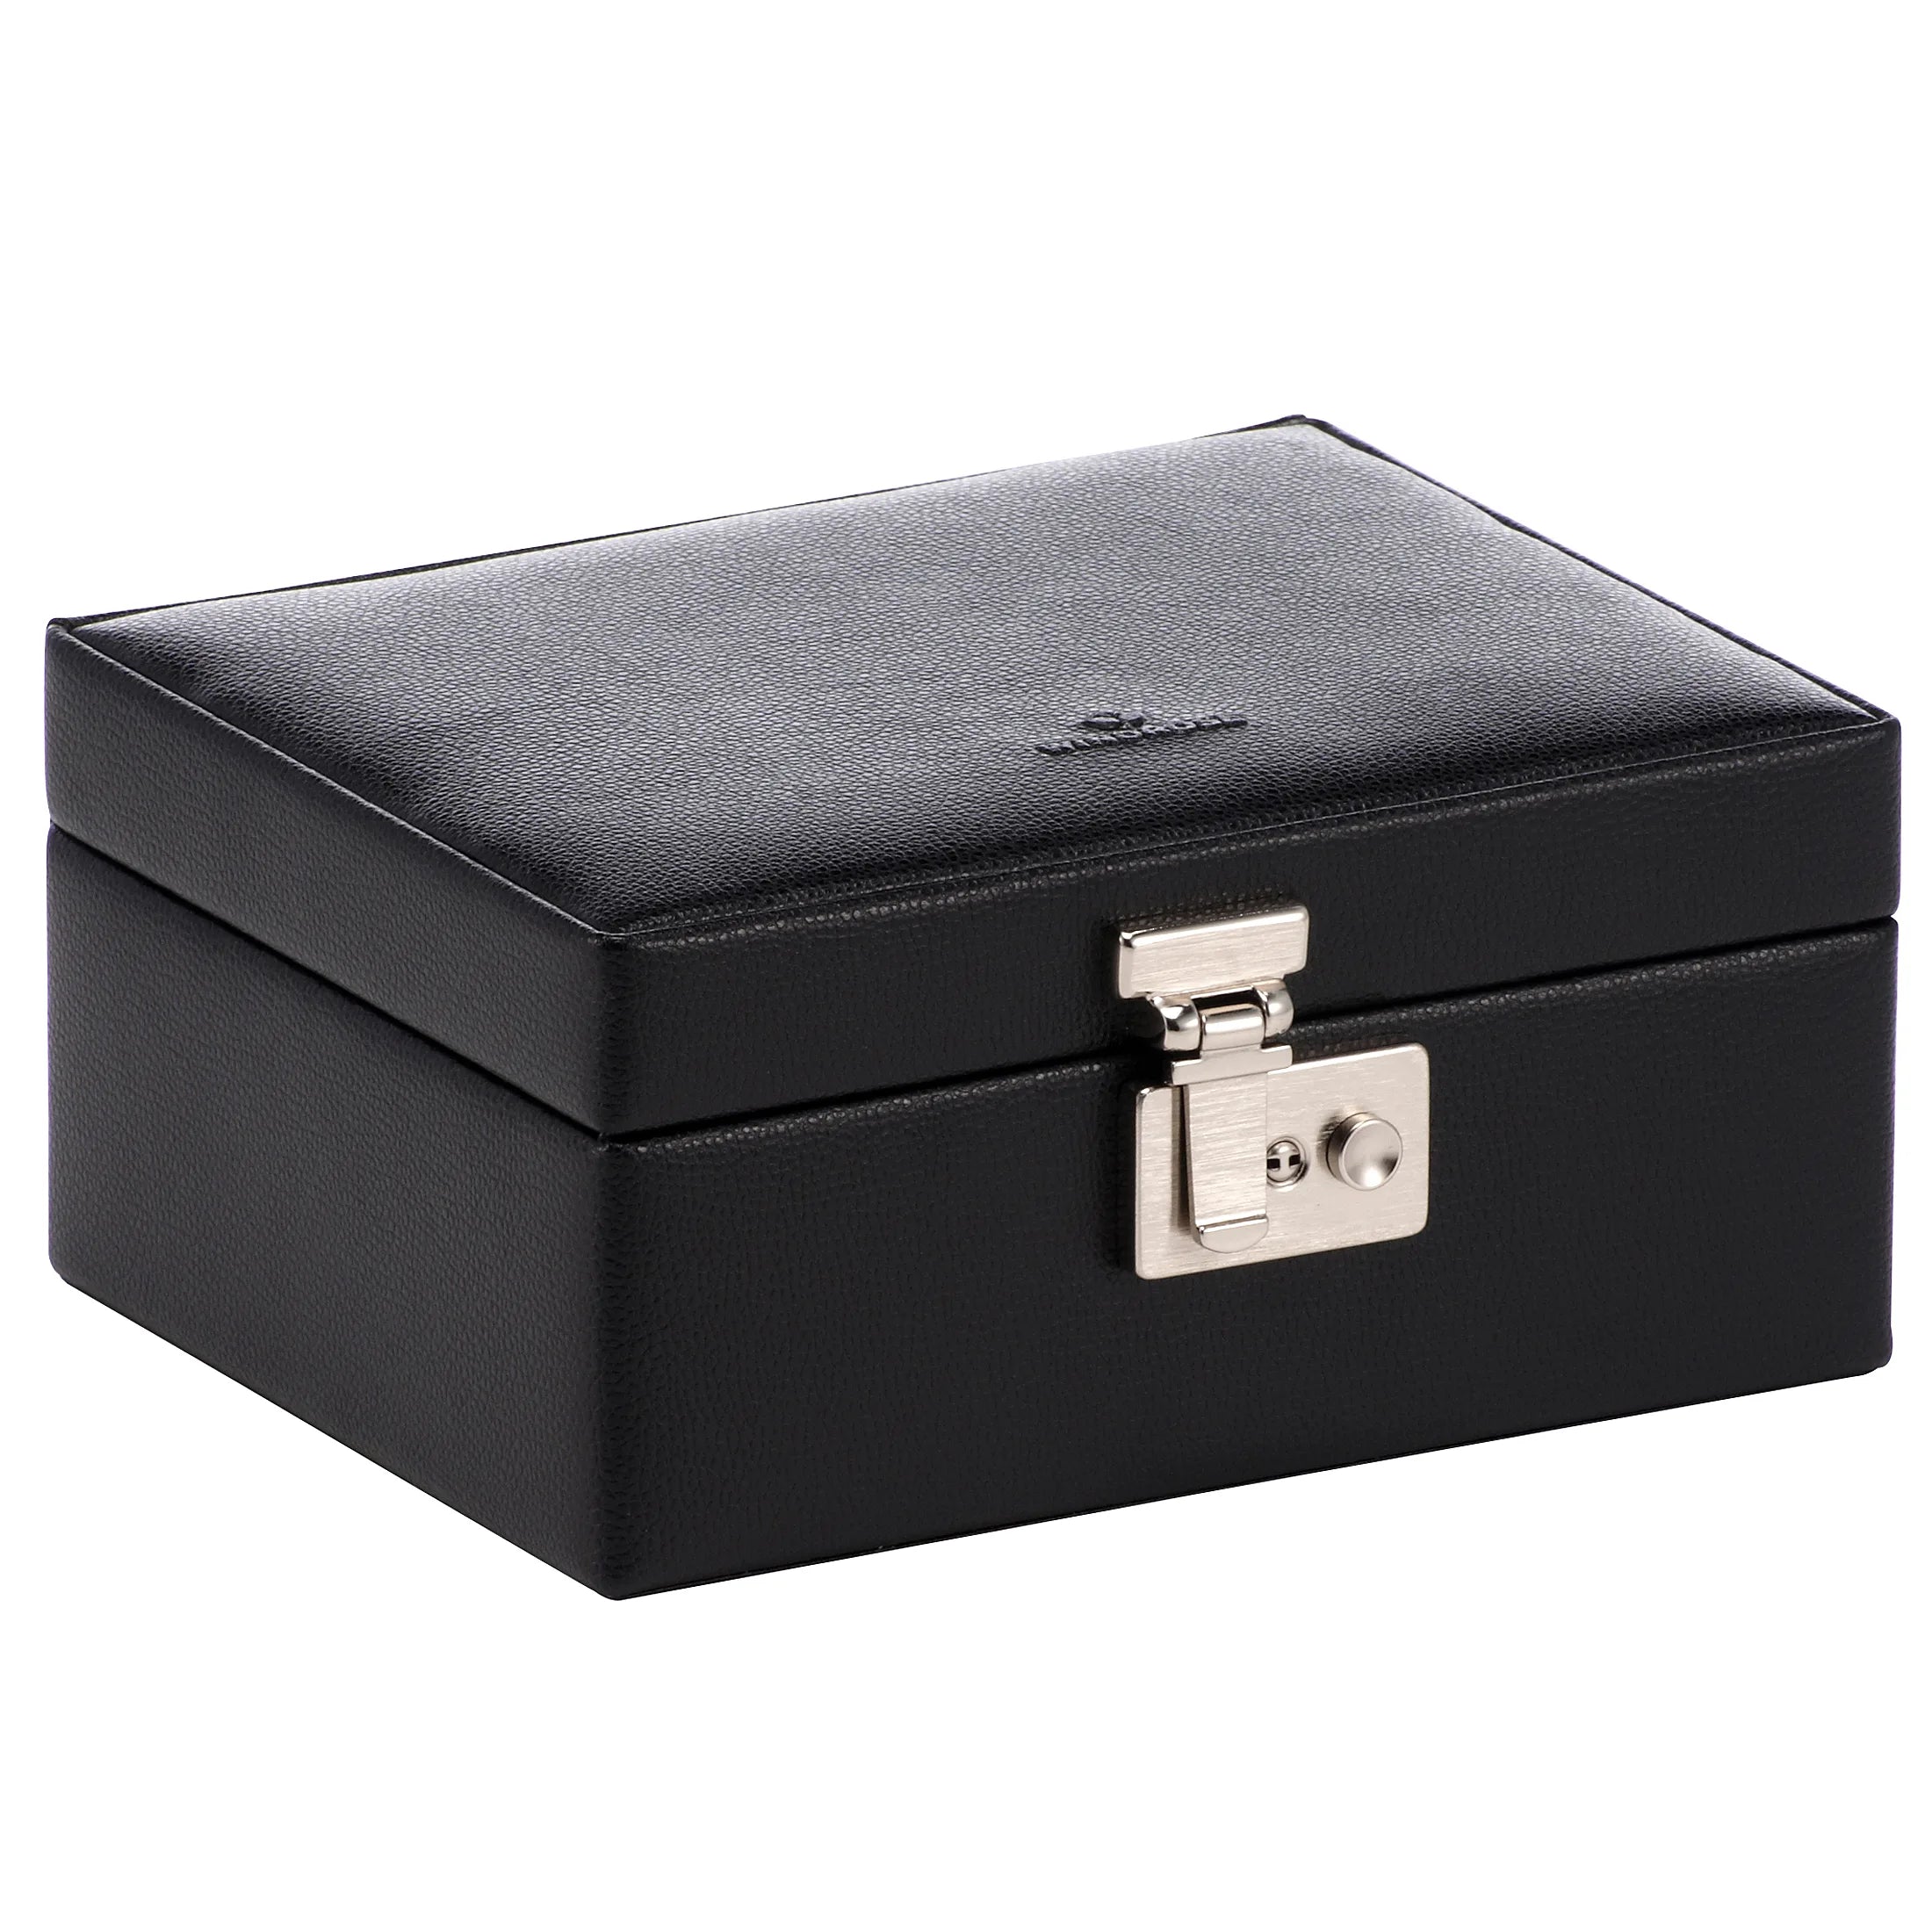 Windrose Beluga watch box for 8 watches 19 cm - black